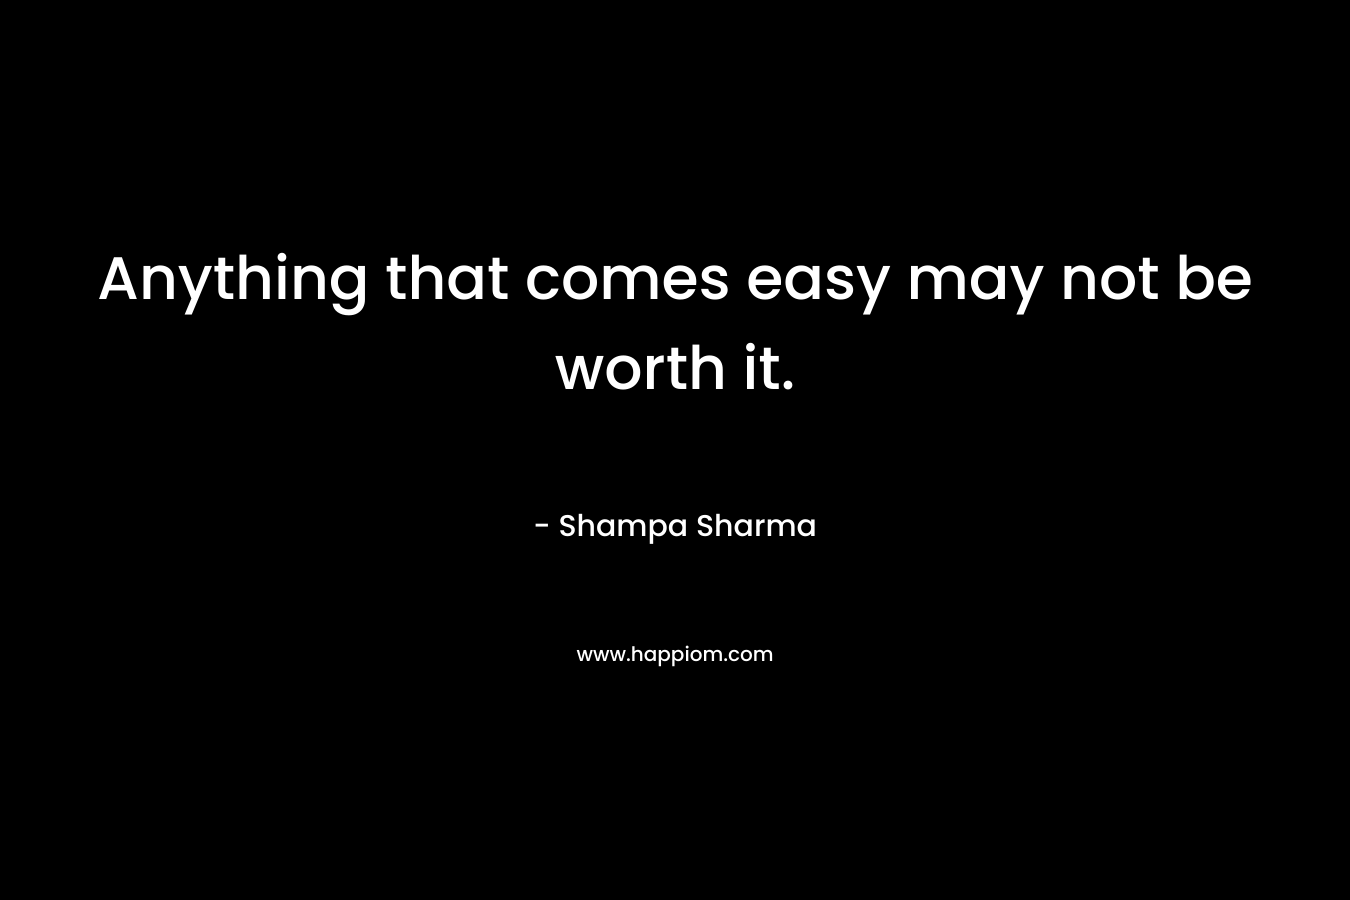 Anything that comes easy may not be worth it. – Shampa Sharma